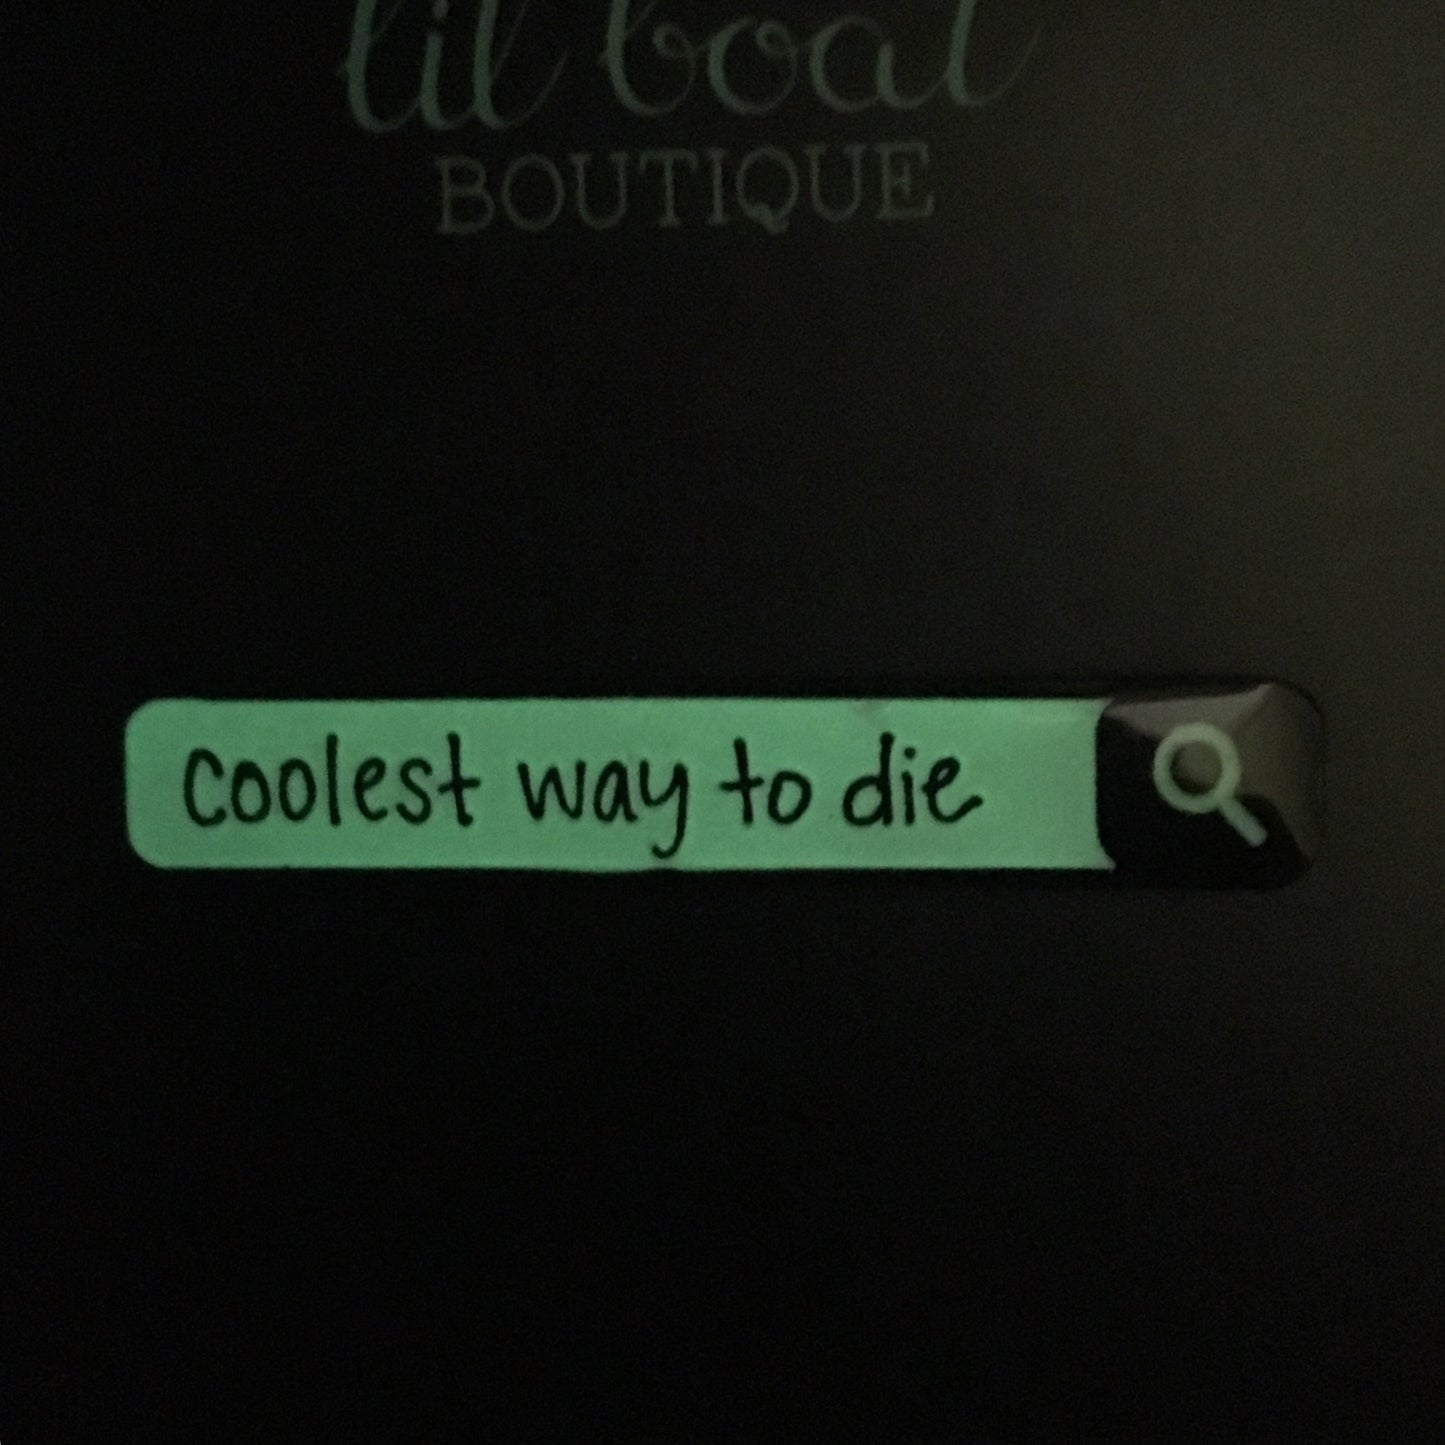 Coolest Way To Die - Search Bar Cool Death Enamel Pin